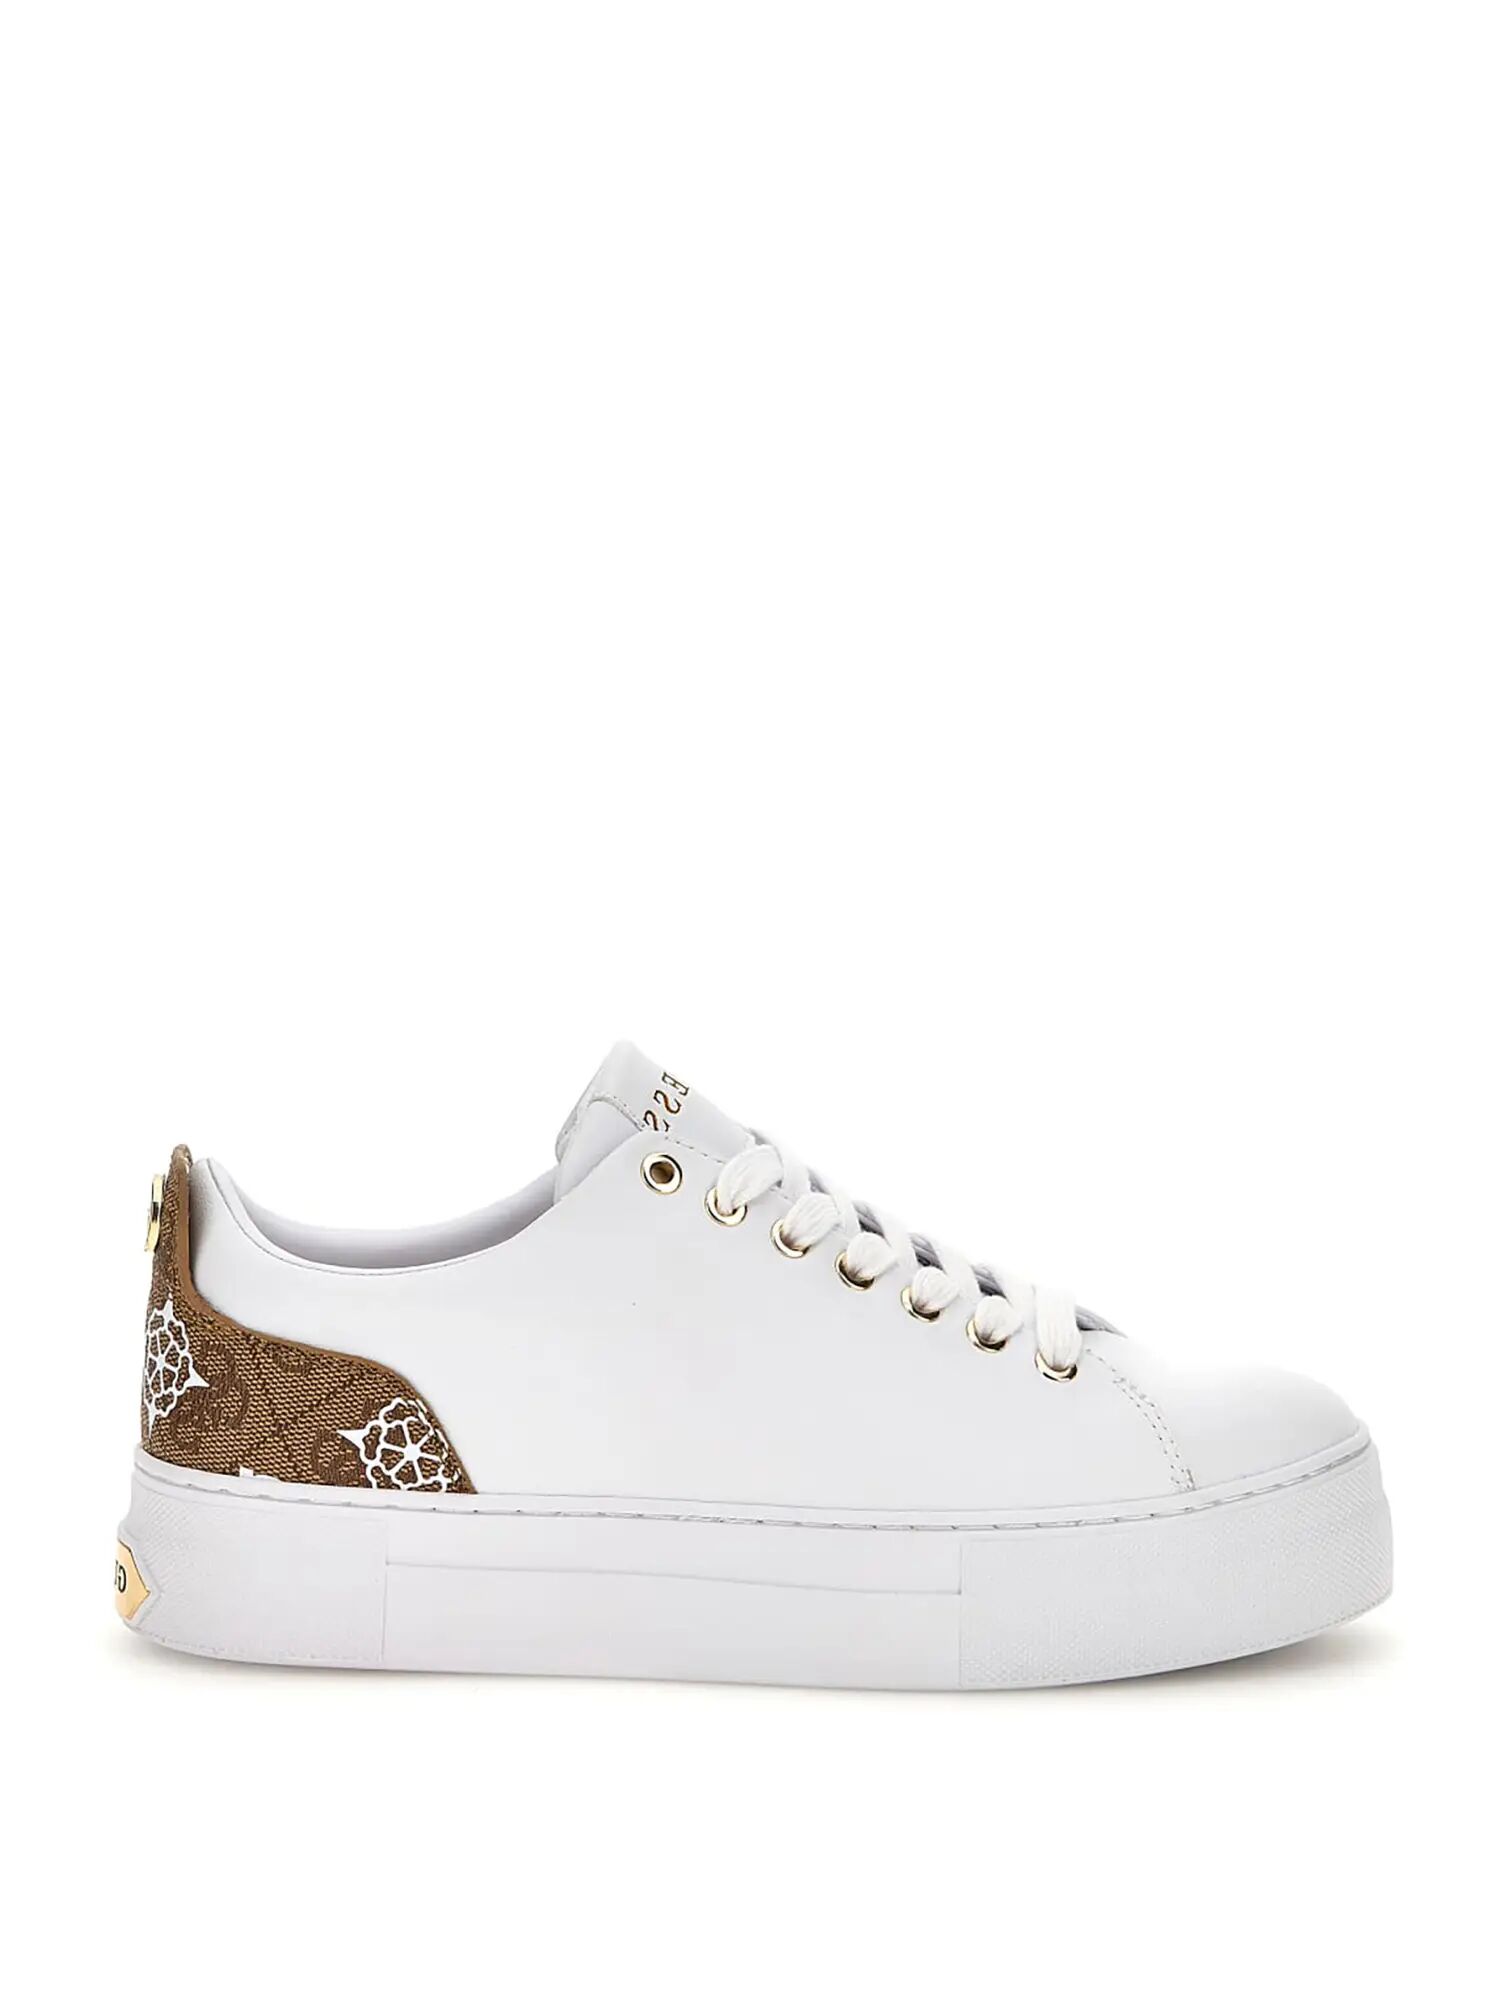 Guess Sneakers Bianche Donna BIANCO 36